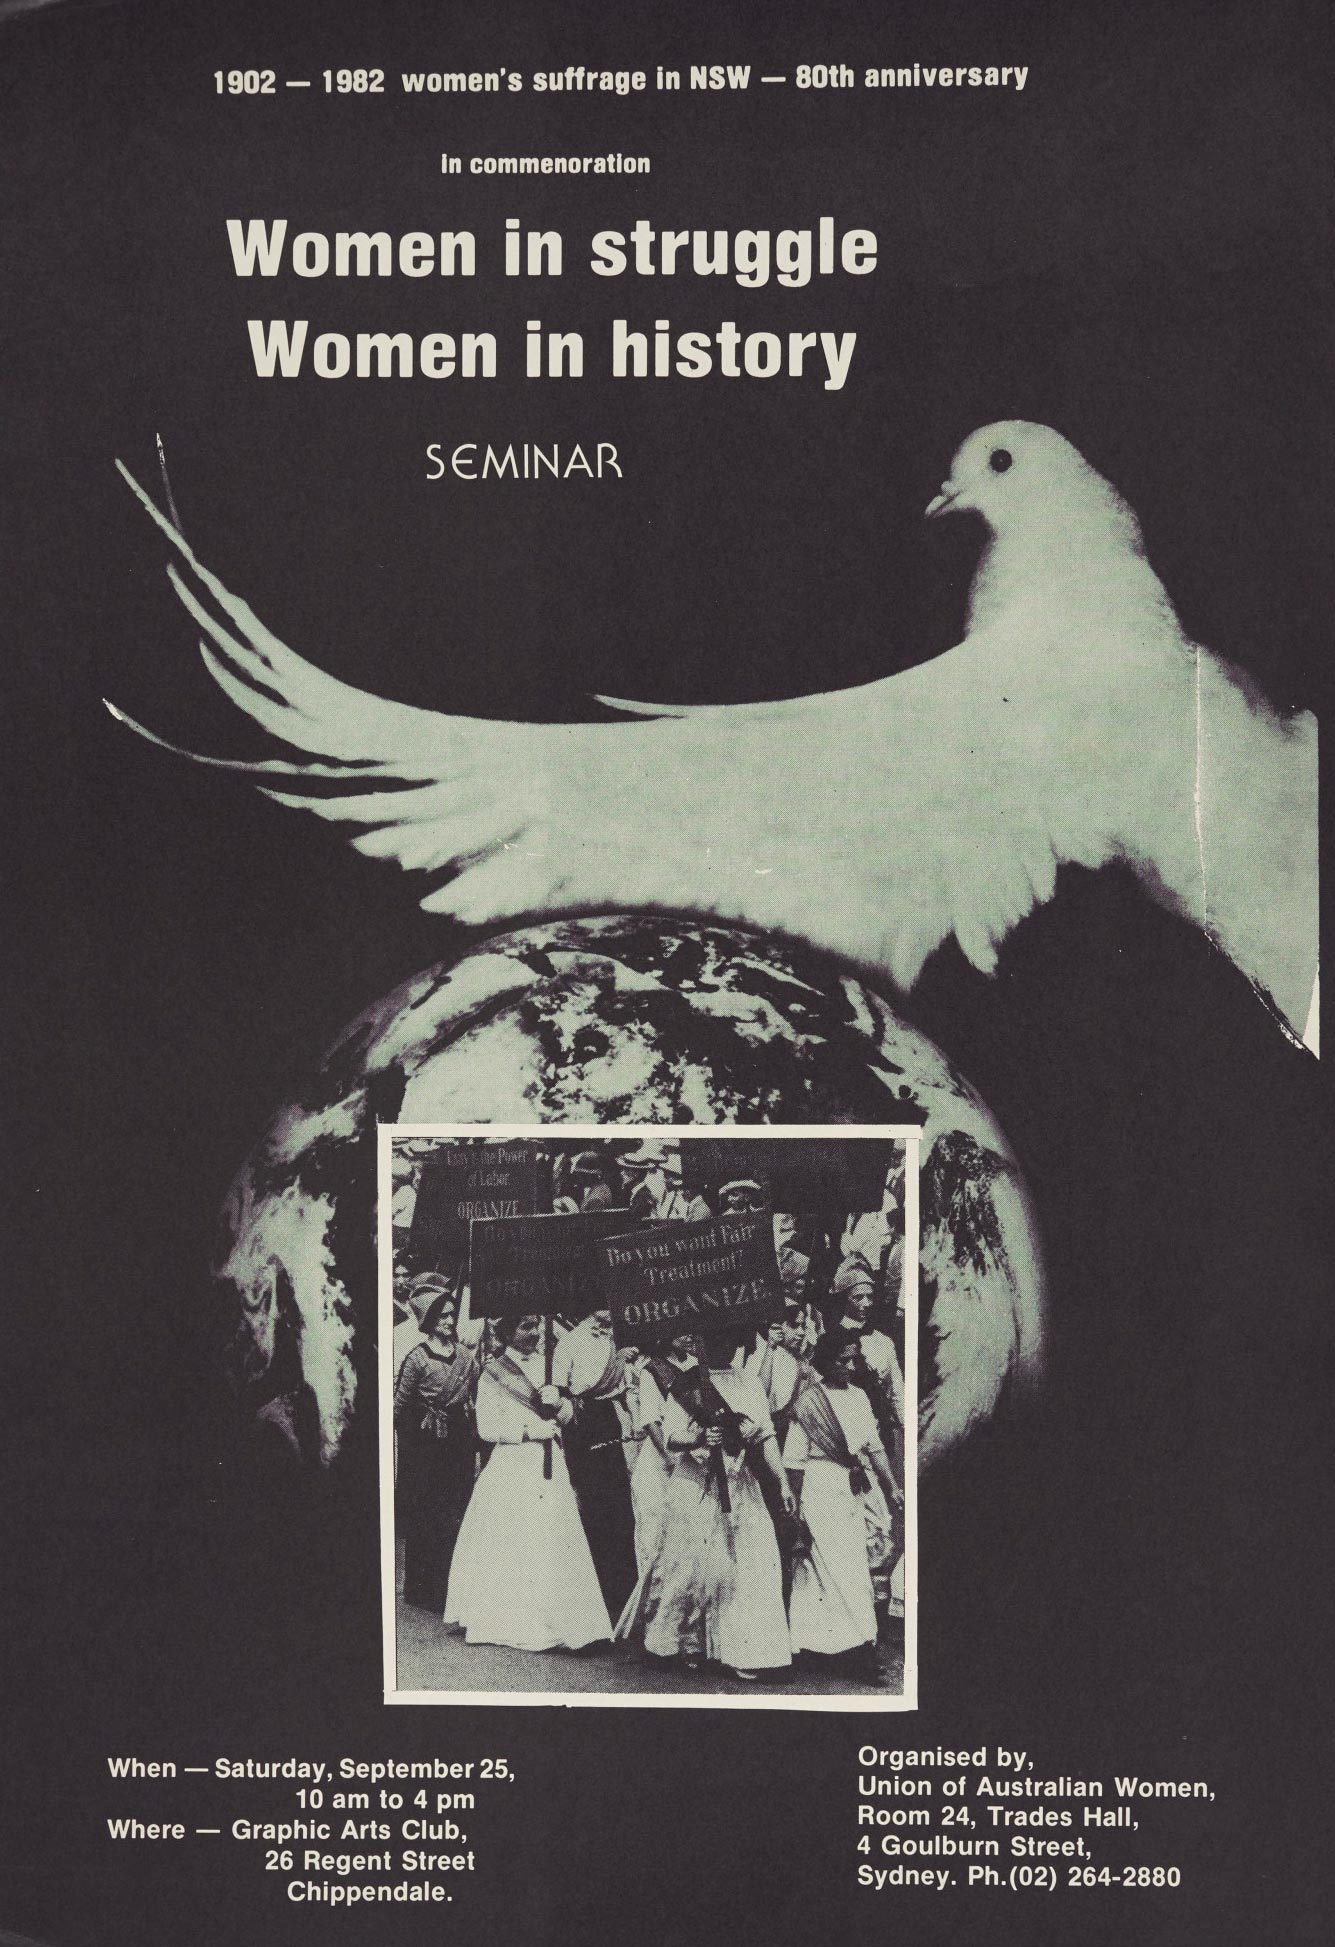 Poster titled ‘Women in Struggle, Women in History’. Commemorating the 80th anniversary of women’s suffrage in New South Wales, 1982.